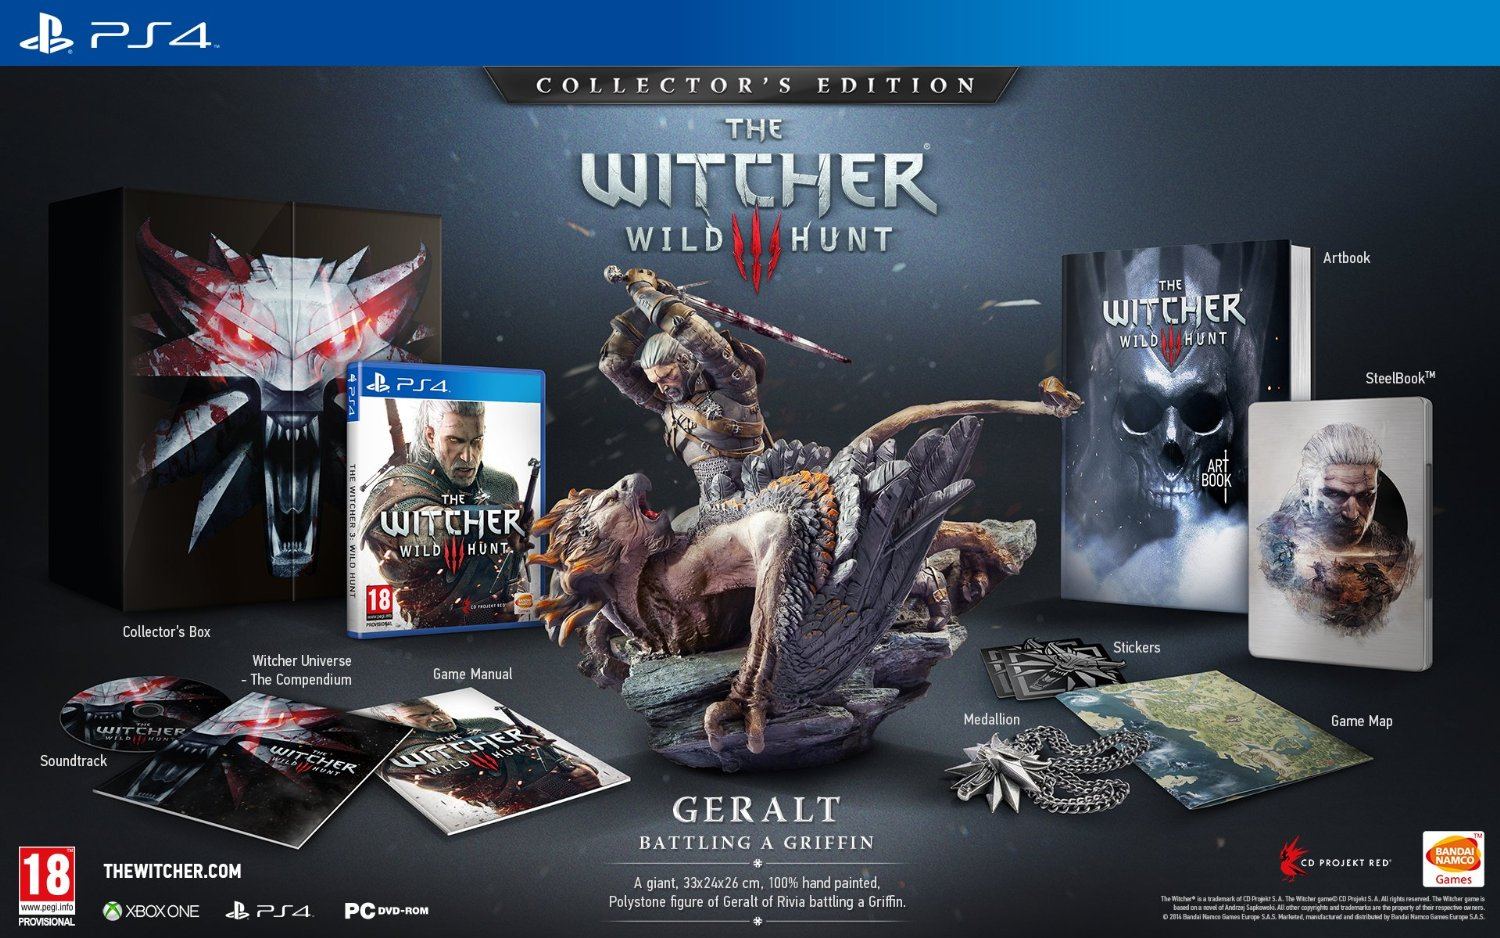 Shop Bandai The Witcher 3: Wild Hunt for PS4